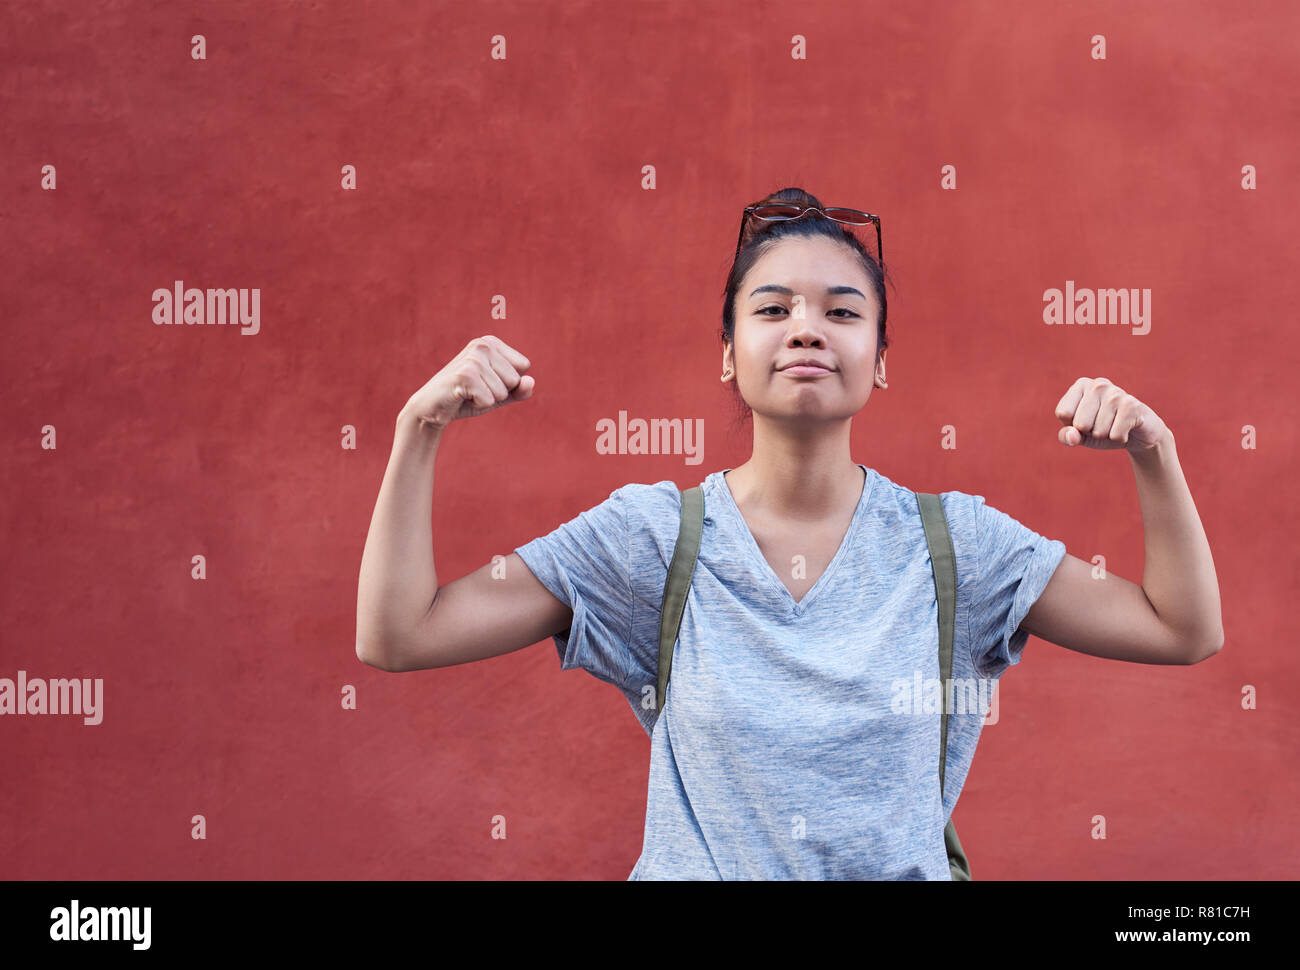 Smiling young Asian woman jokingly flexing her muscles outside Stock Photo